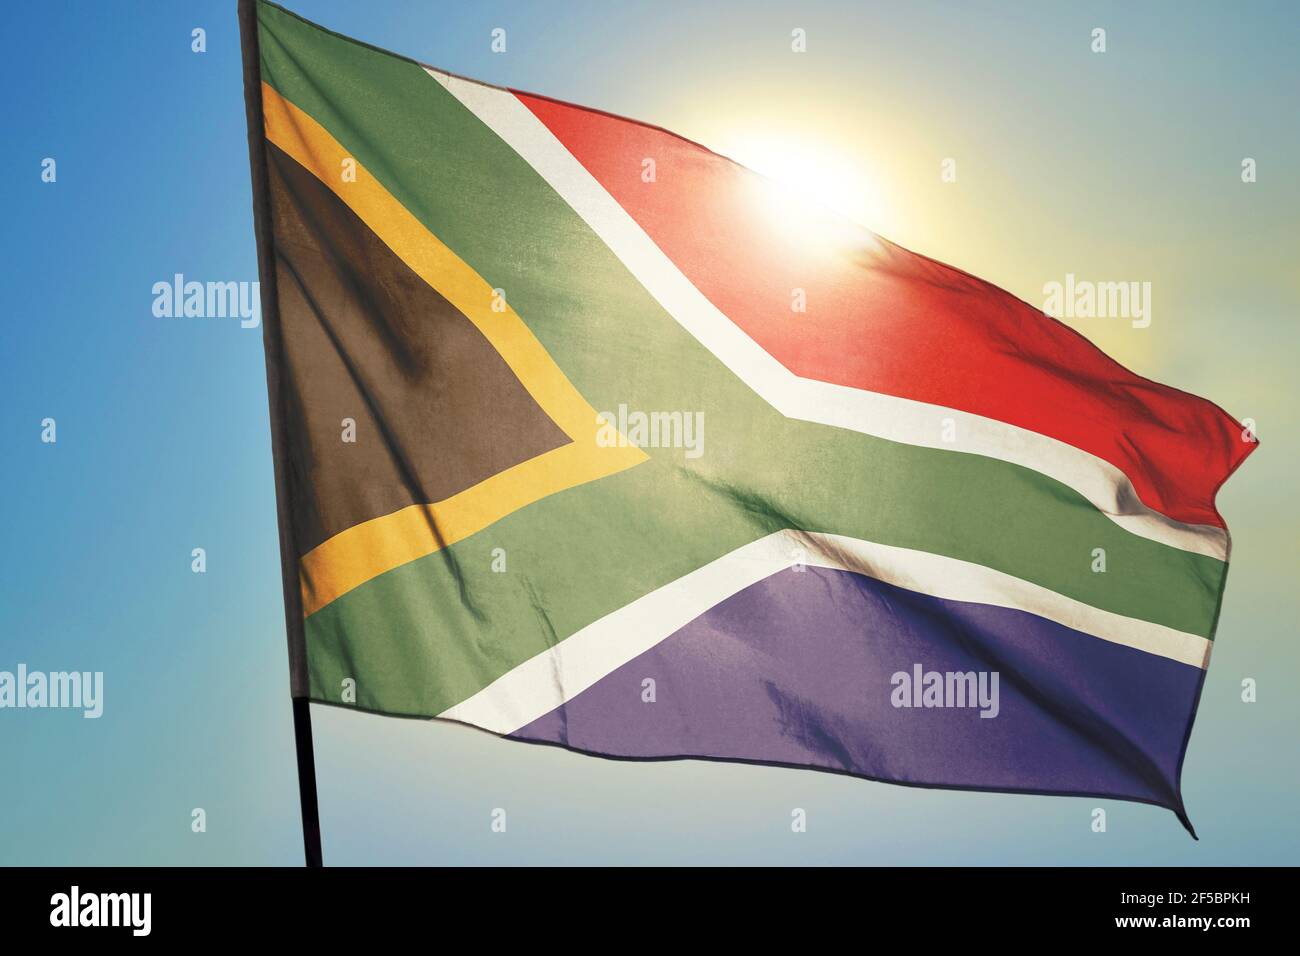 South Africa flag waving on the wind in front of sun Stock Photo